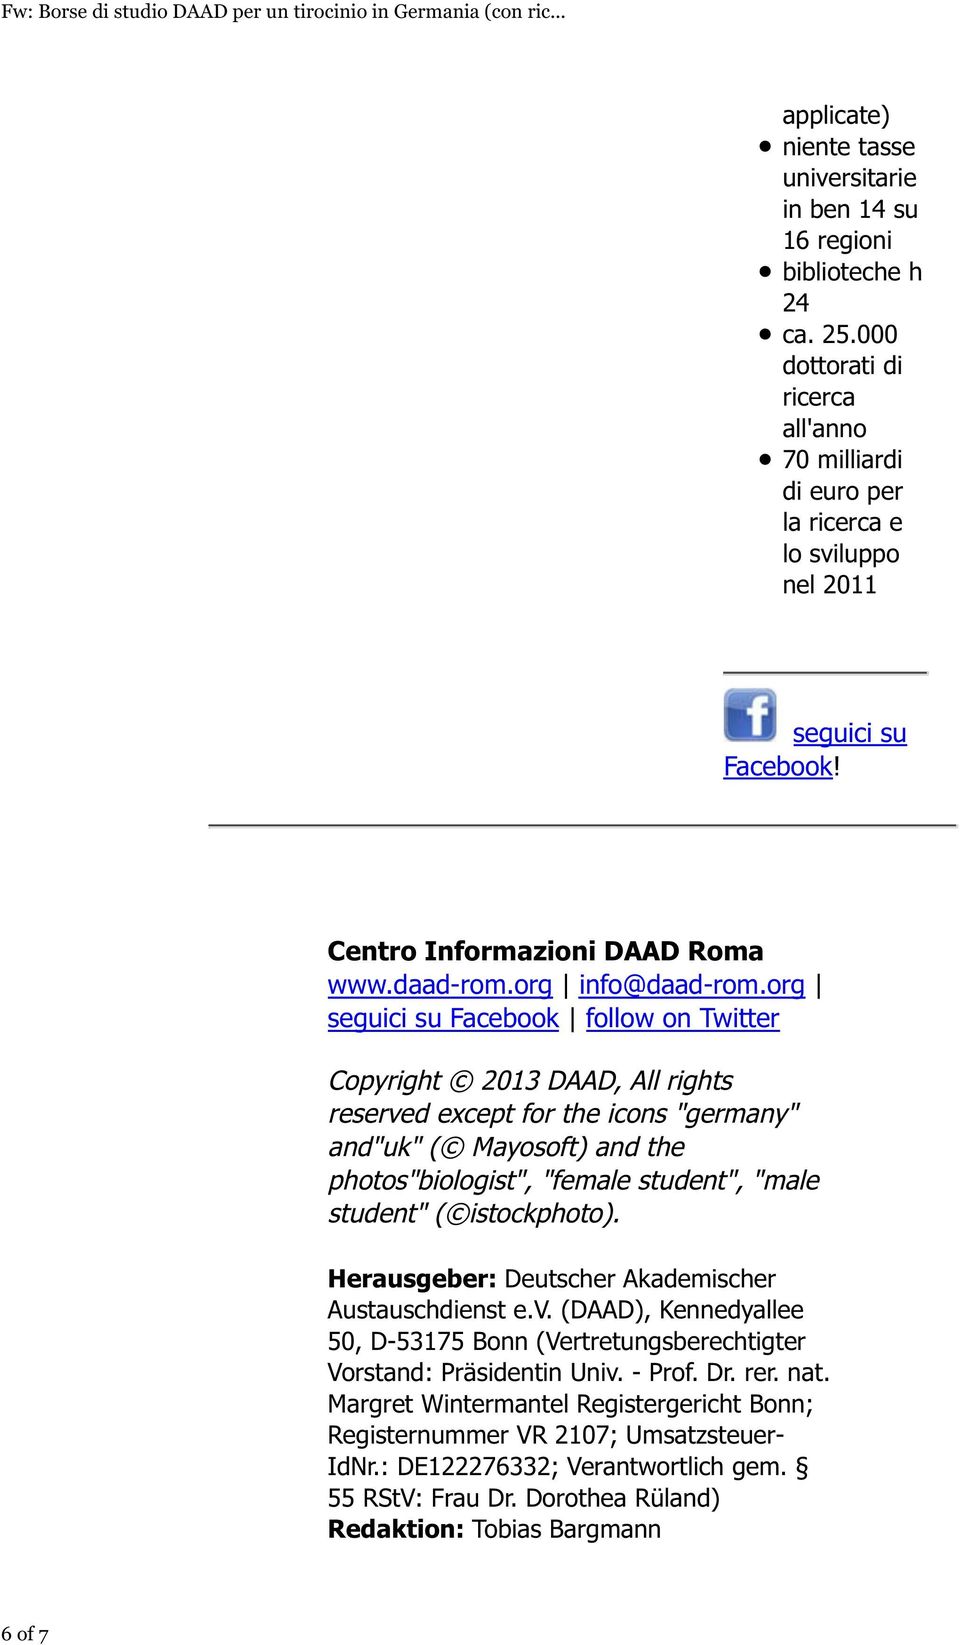 org seguici su Facebook follow on Twitter Copyright 2013 DAAD, All rights reserved except for the icons "germany" and"uk" ( Mayosoft) and the photos"biologist", "female student", "male student" (